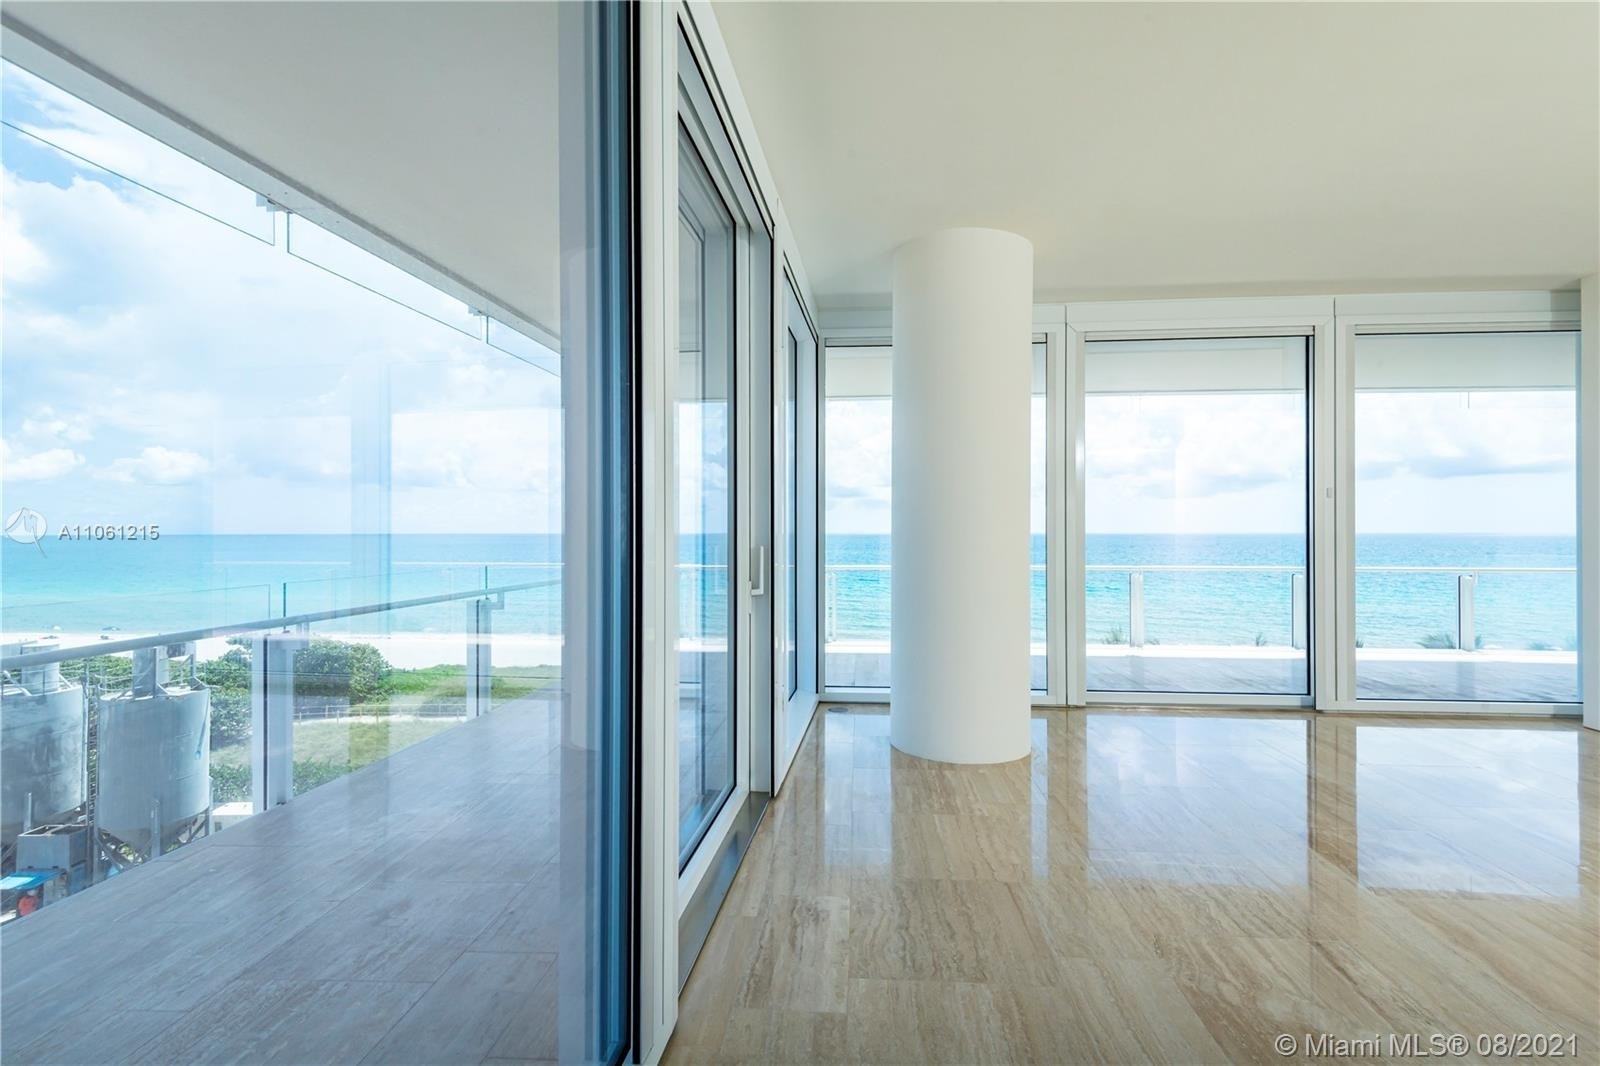 13. Condominiums at 9111 Collins Ave, N-521 Surfside